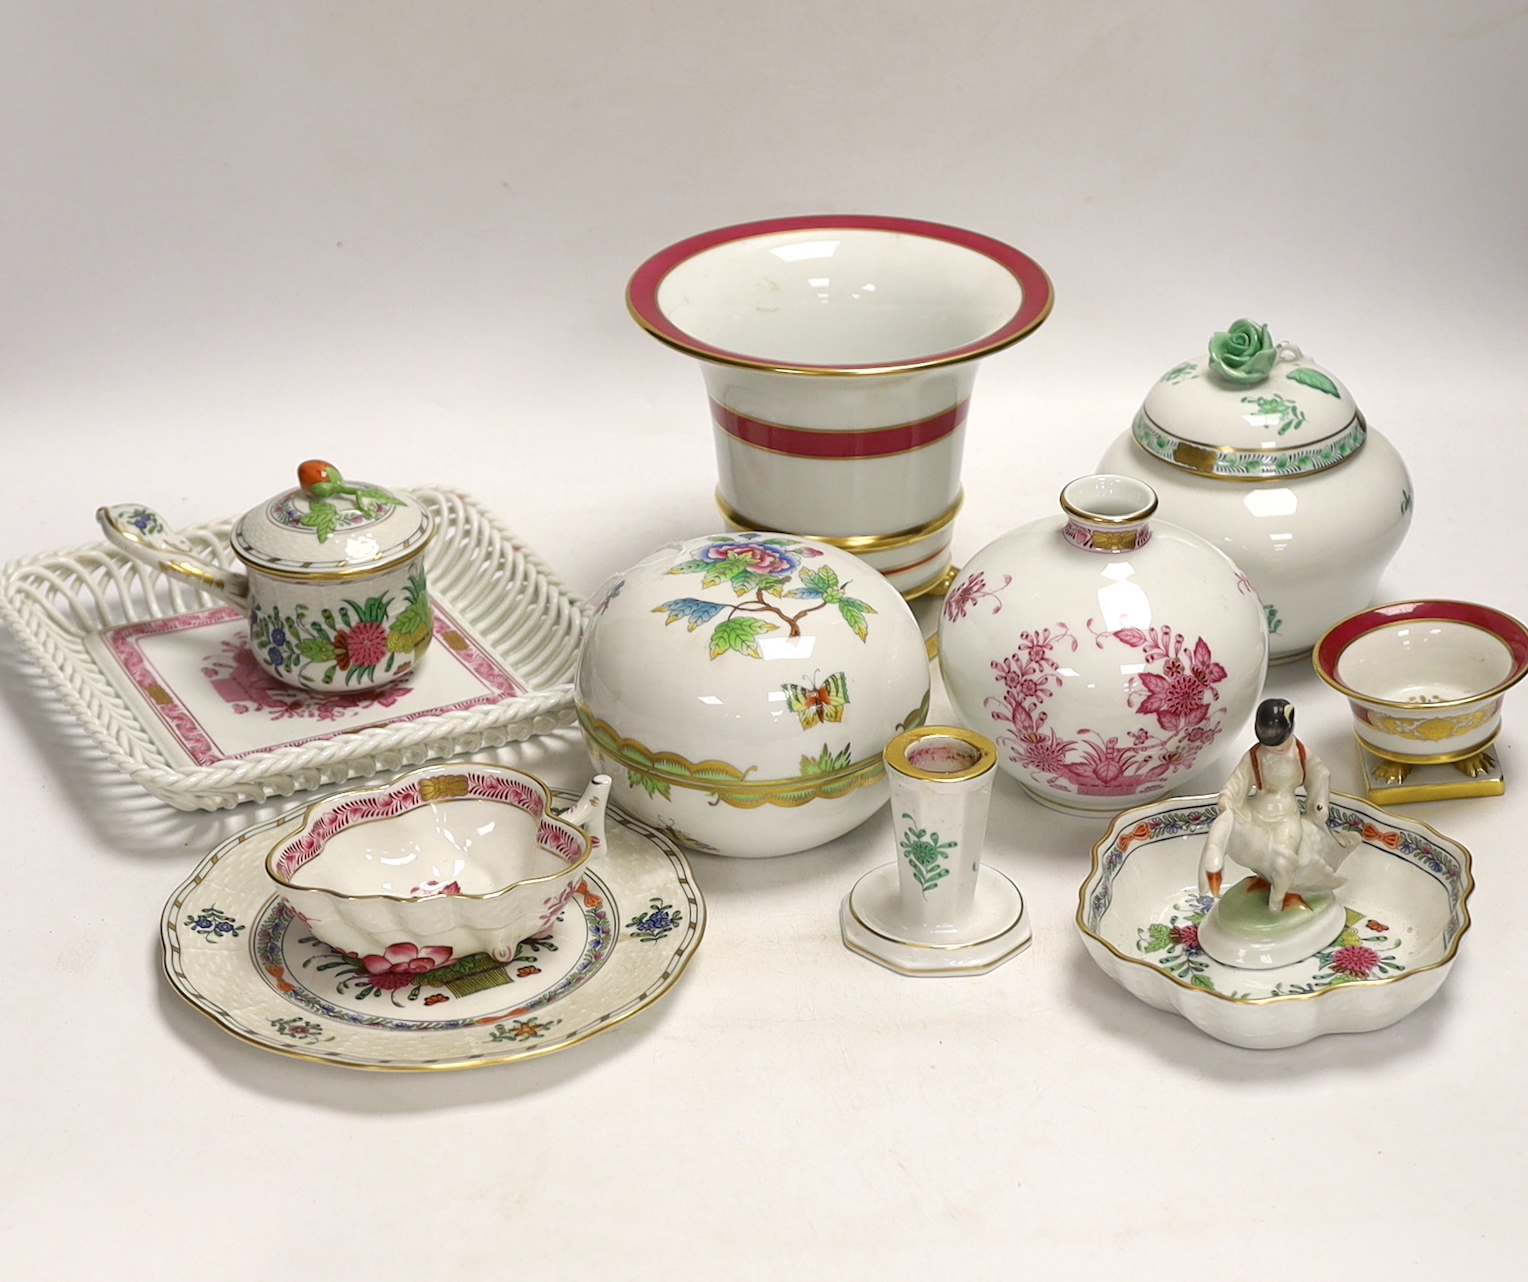 A group of Herend, Hungary porcelain wares including; a covered dish, tray, candlestick, two pedestal vases, boy on a goose, etc. tallest 13cm